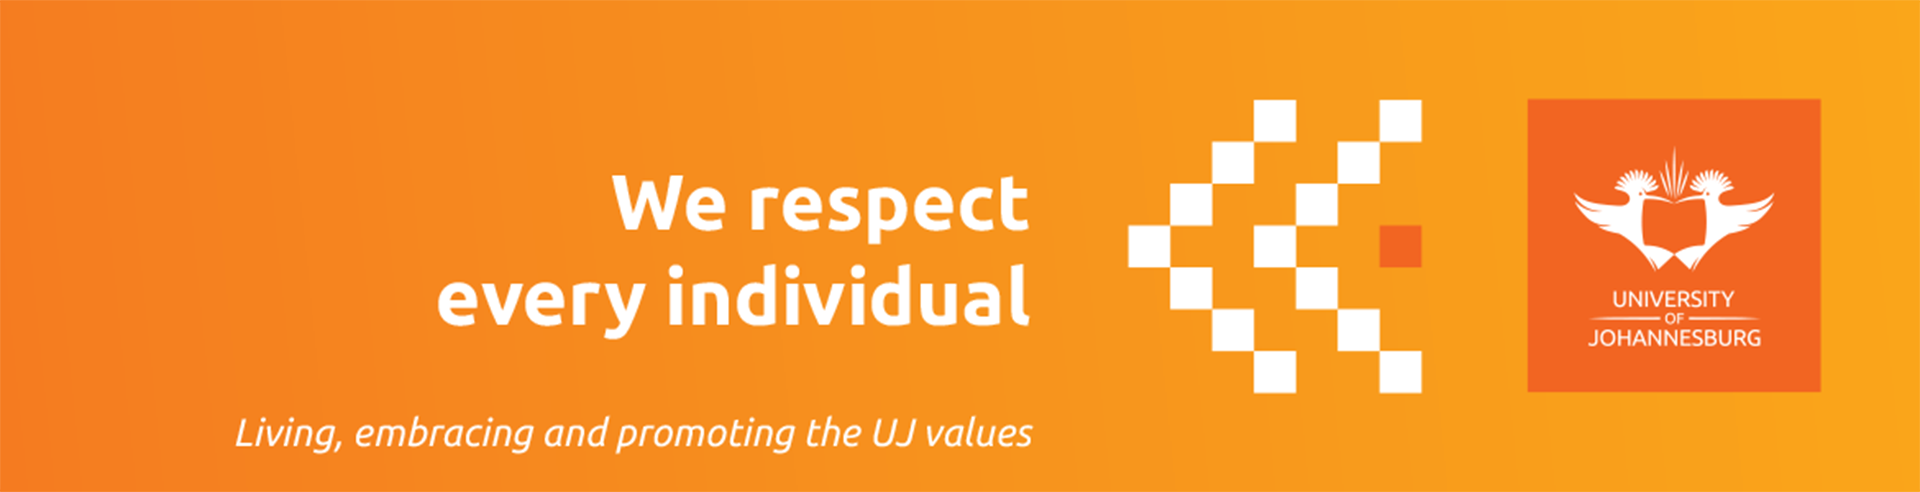 Uj Values Expressions Posters 2020 Ulink 1170x300mm 6